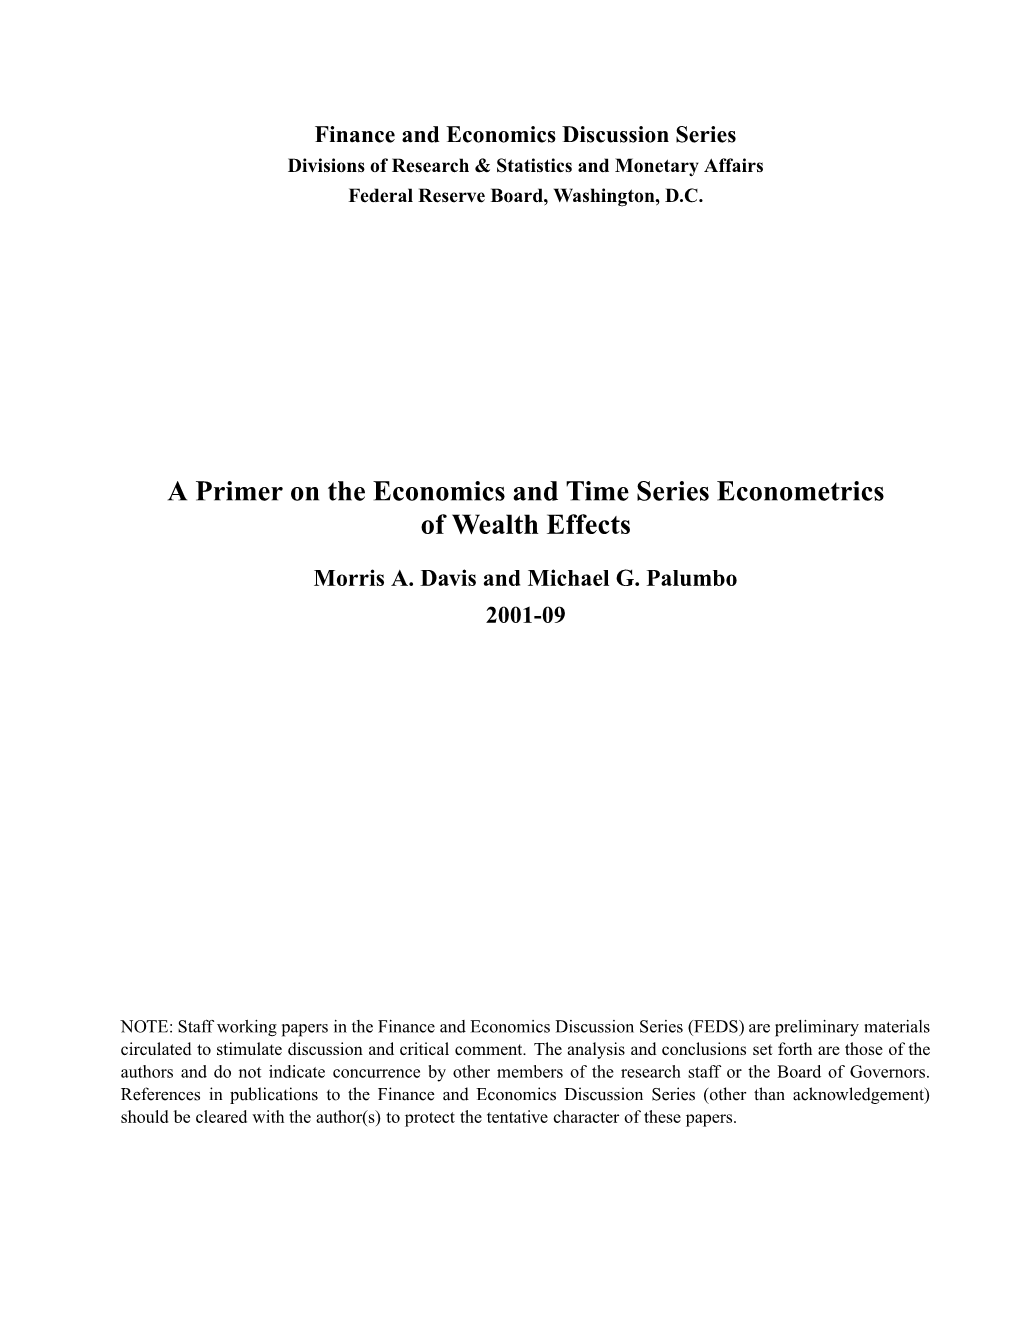 A Primer on the Economics and Time Series Econometrics of Wealth Effects